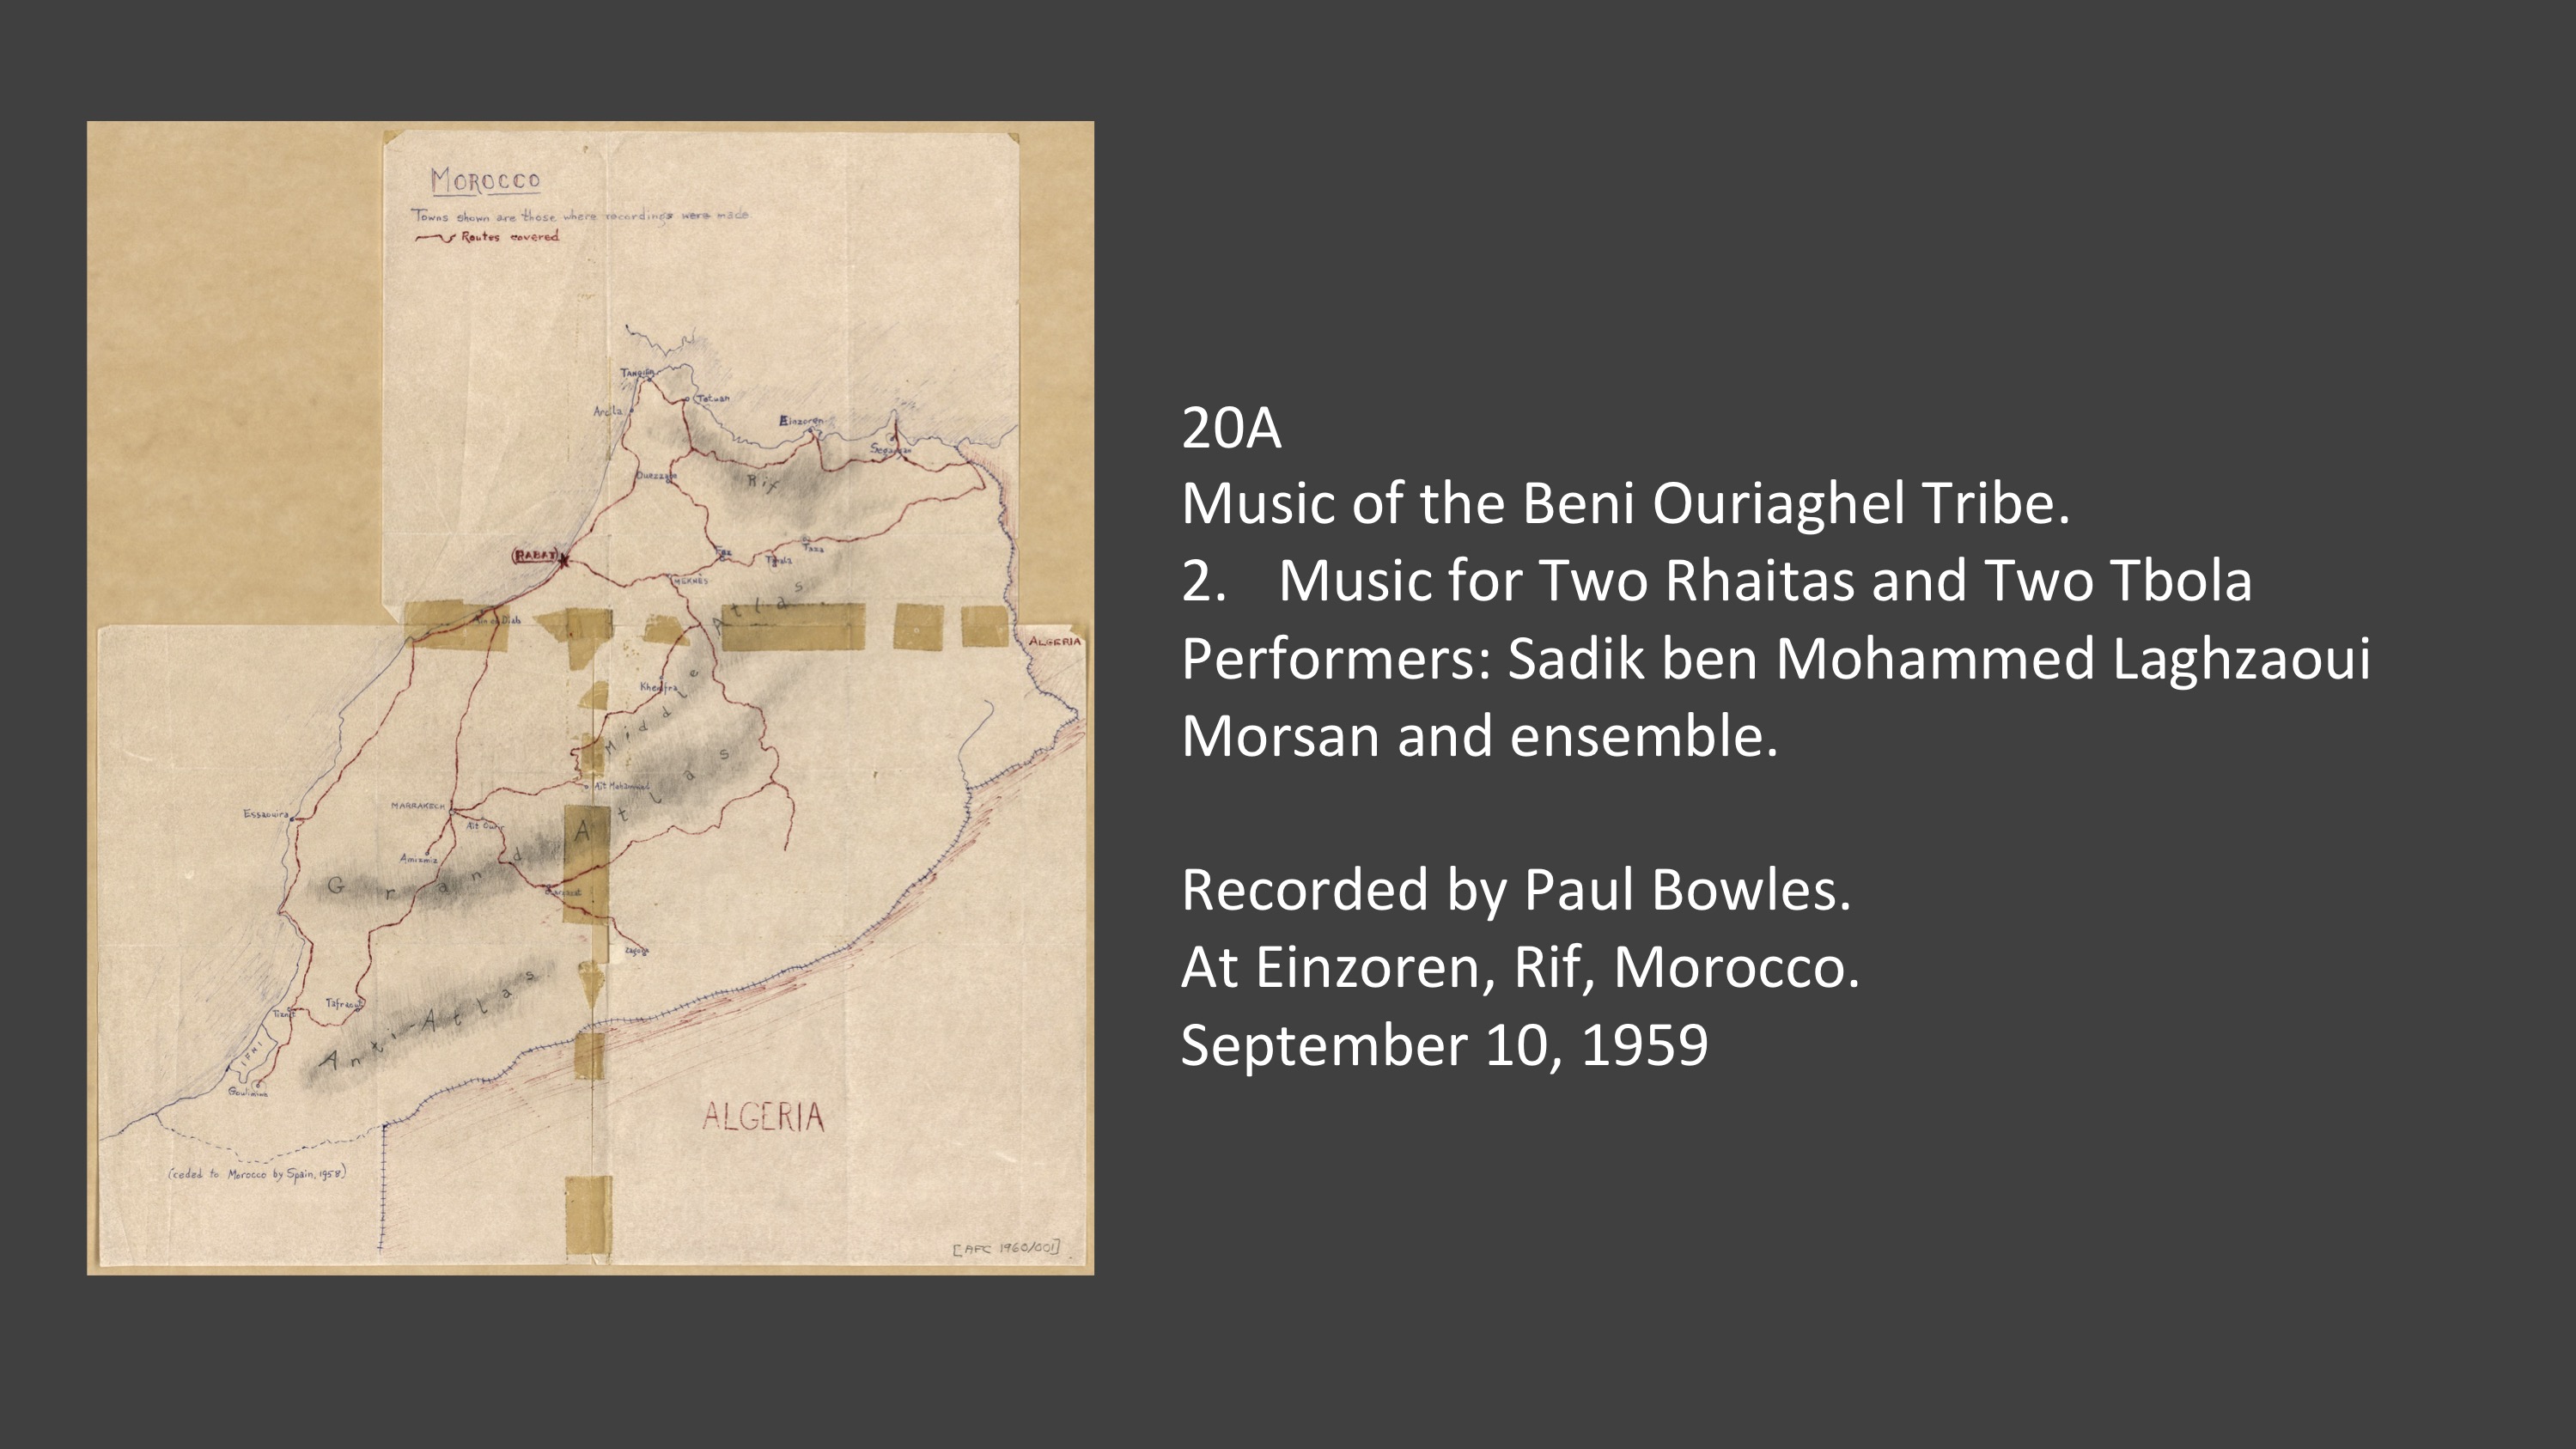 20A 2 - Music for Two Rhaitas and Two Tbola
Music of the Beni Ouriaghel Tribe.
Performers: Sadik ben Mohammed Laghzaoui Morsan and ensemble.

Recorded by Paul Bowles.
At Einzoren, Rif, Morocco.
September 10, 1959